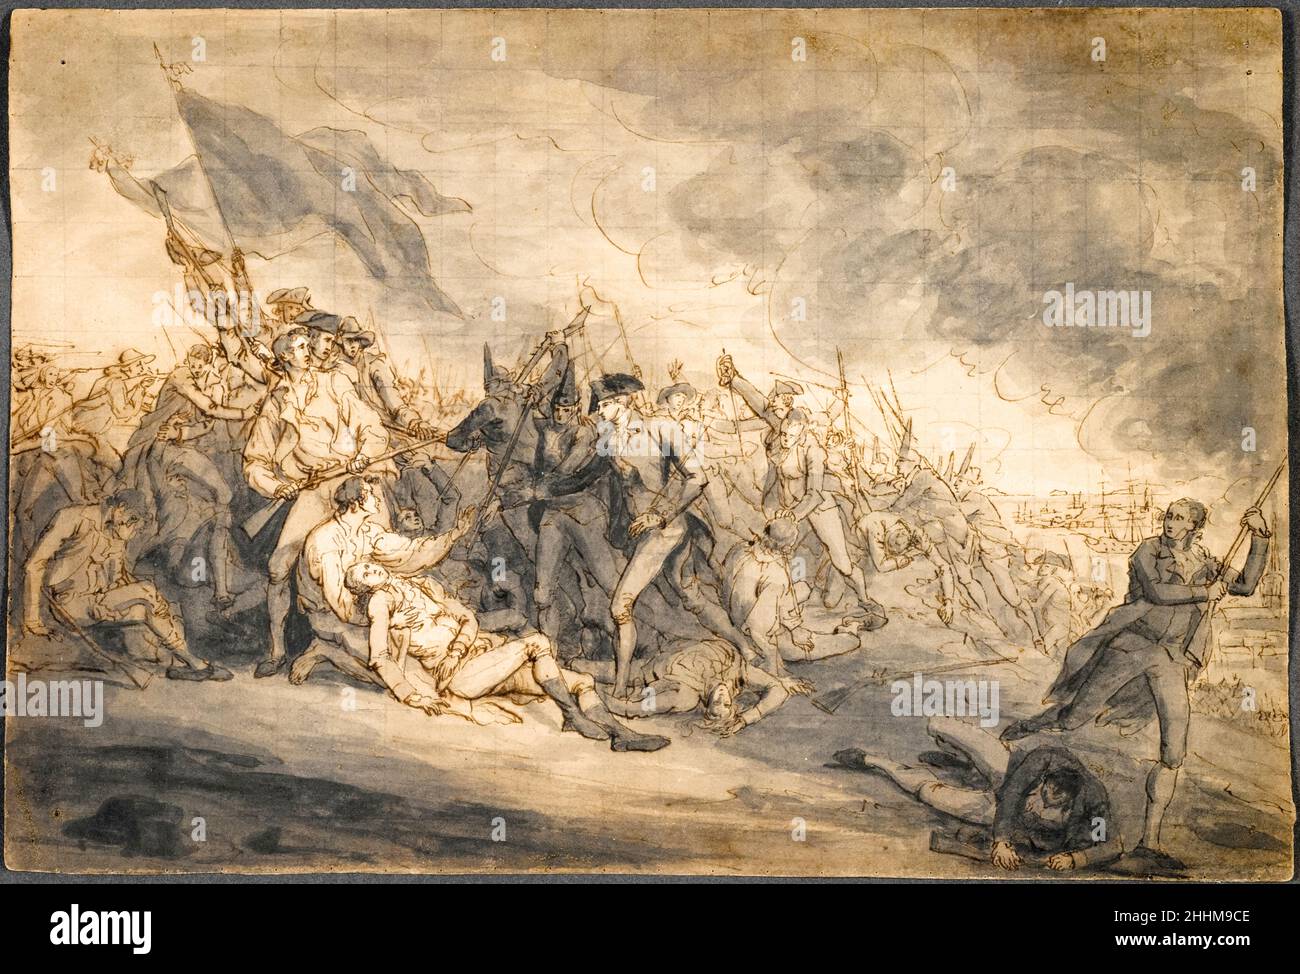 Study for The Death of General Warren at the Battle of Bunker's Hill, drawing by John Trumbull, 1785-1786 Stock Photo